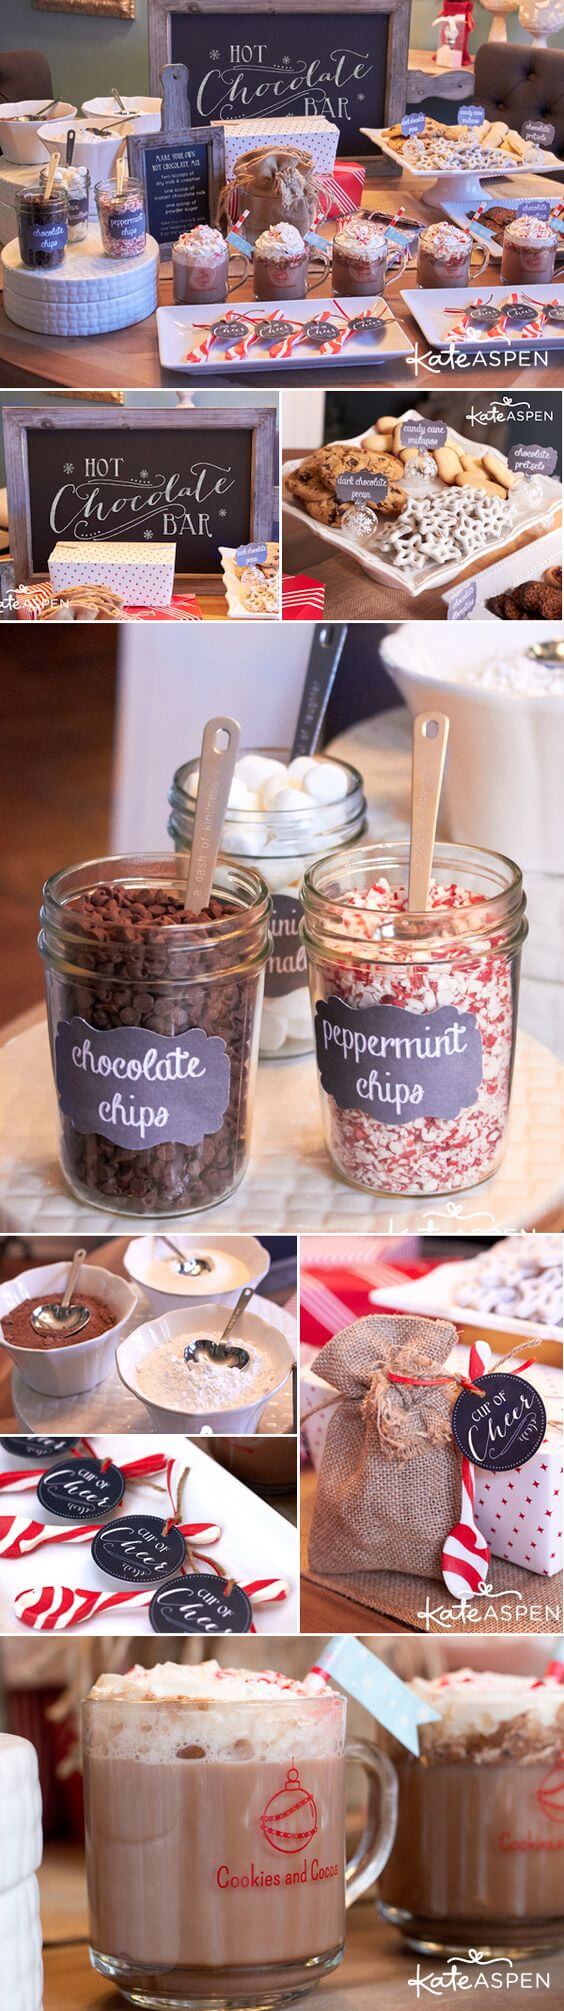 Image of the ultimate hot chocolate bar